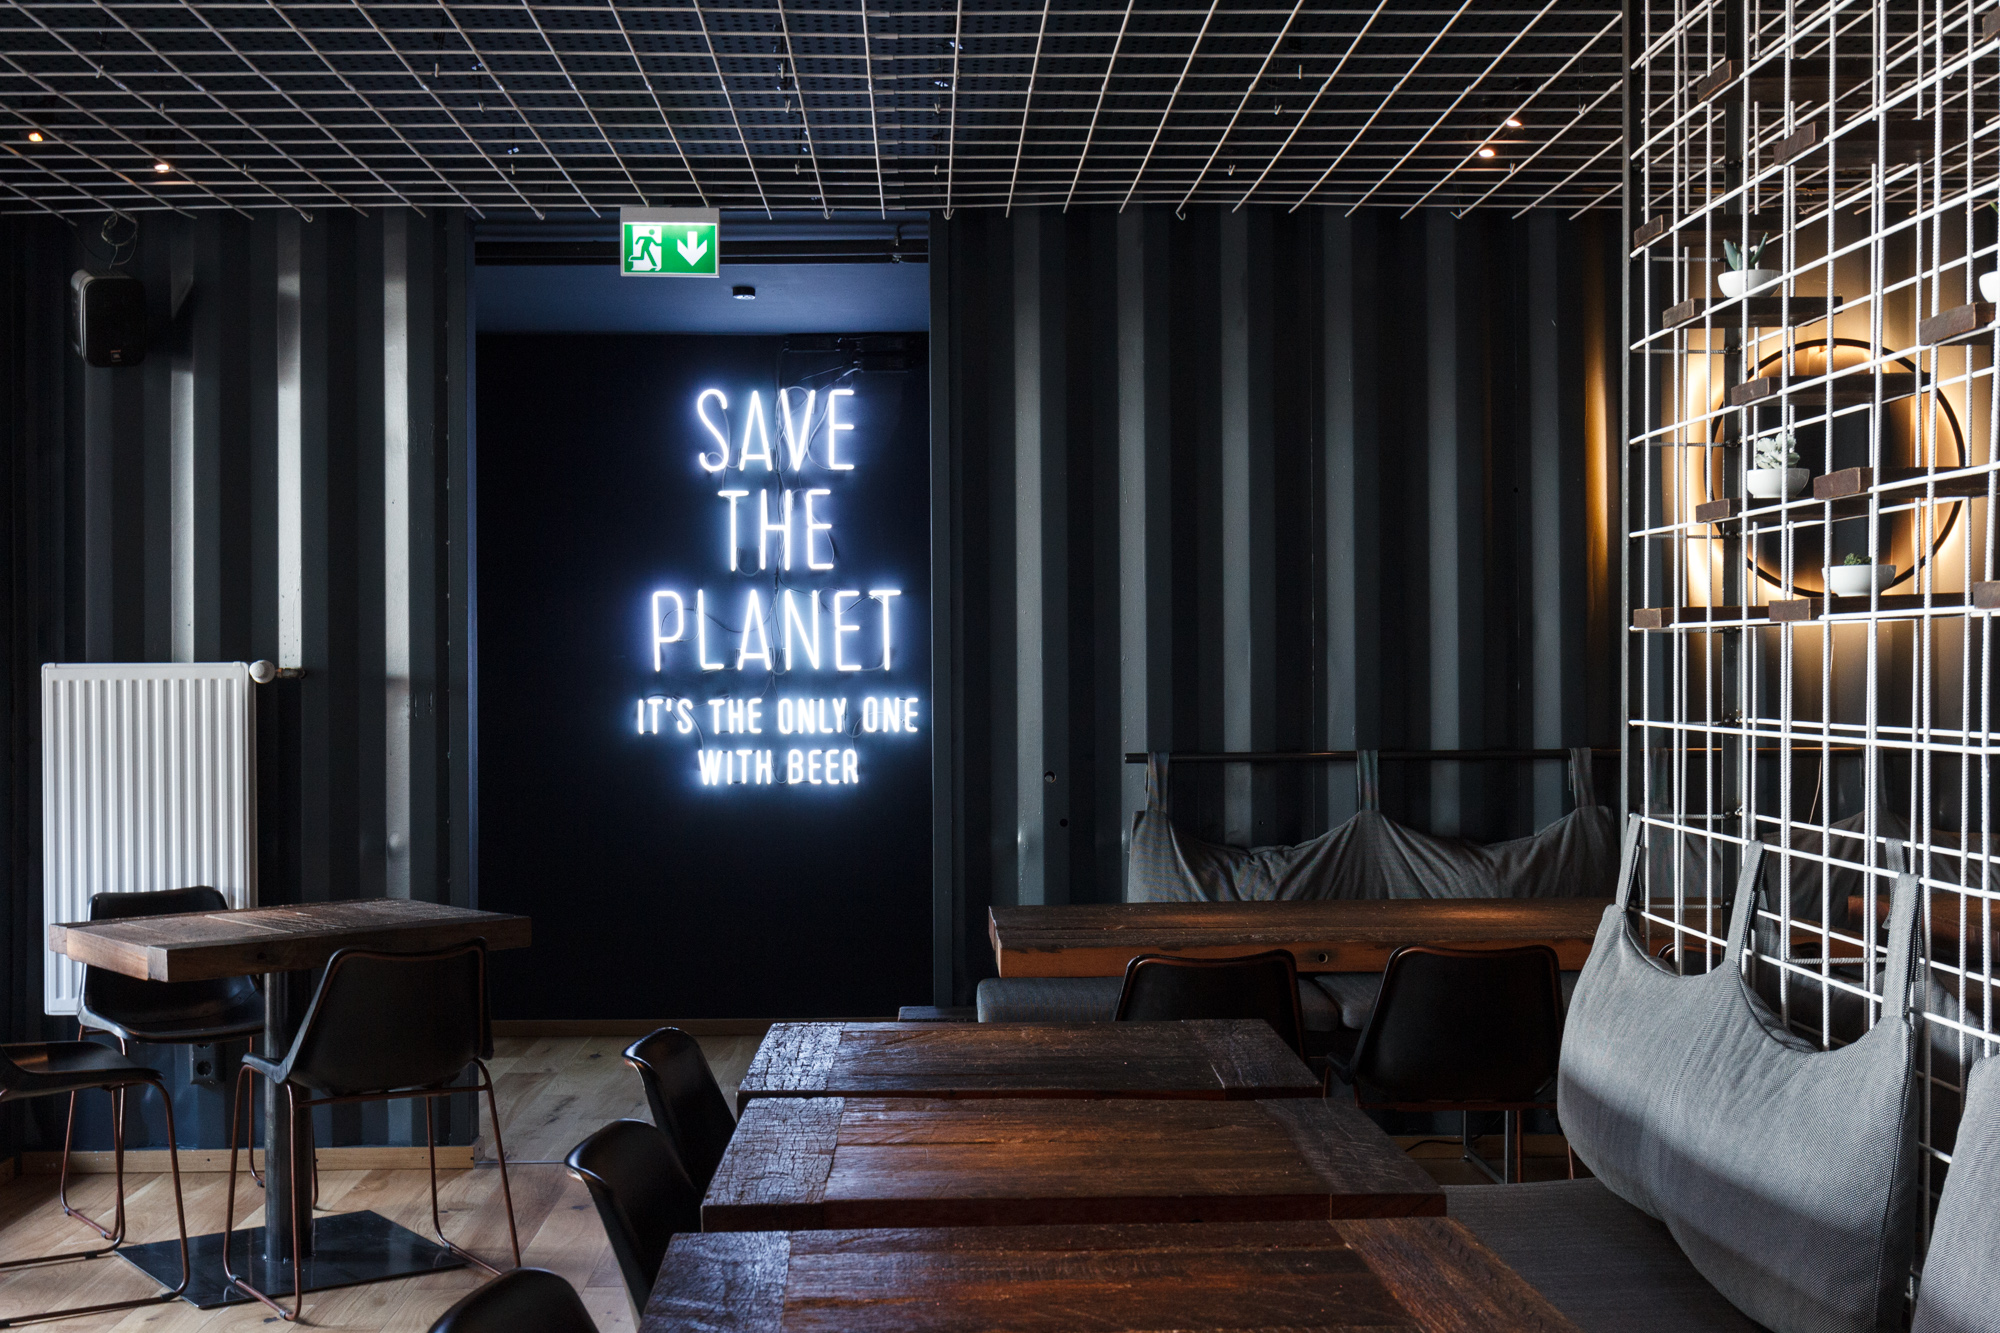 SAVE THE PLANET - IT’S THE ONLY ONE WITH BEER neon artwork at BRLO Brwhouse - a craft beer brewery, bar, restaurant and beer garden and the edge of Park am Gleisdreieck in Berlin